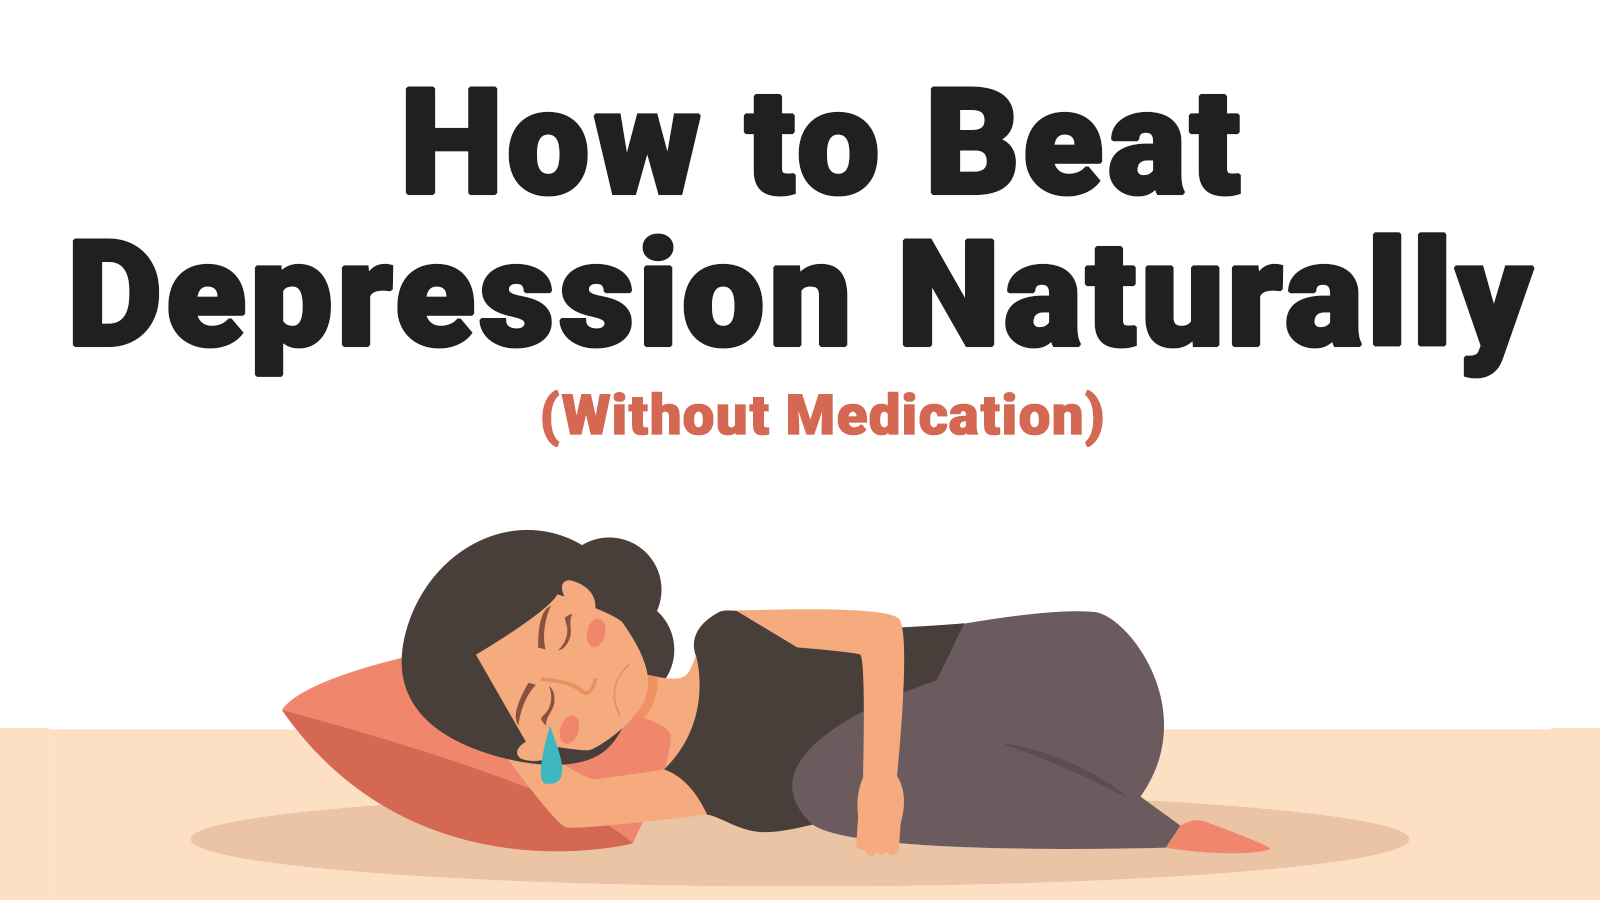 How to Beat Depression Naturally Without Medication ...